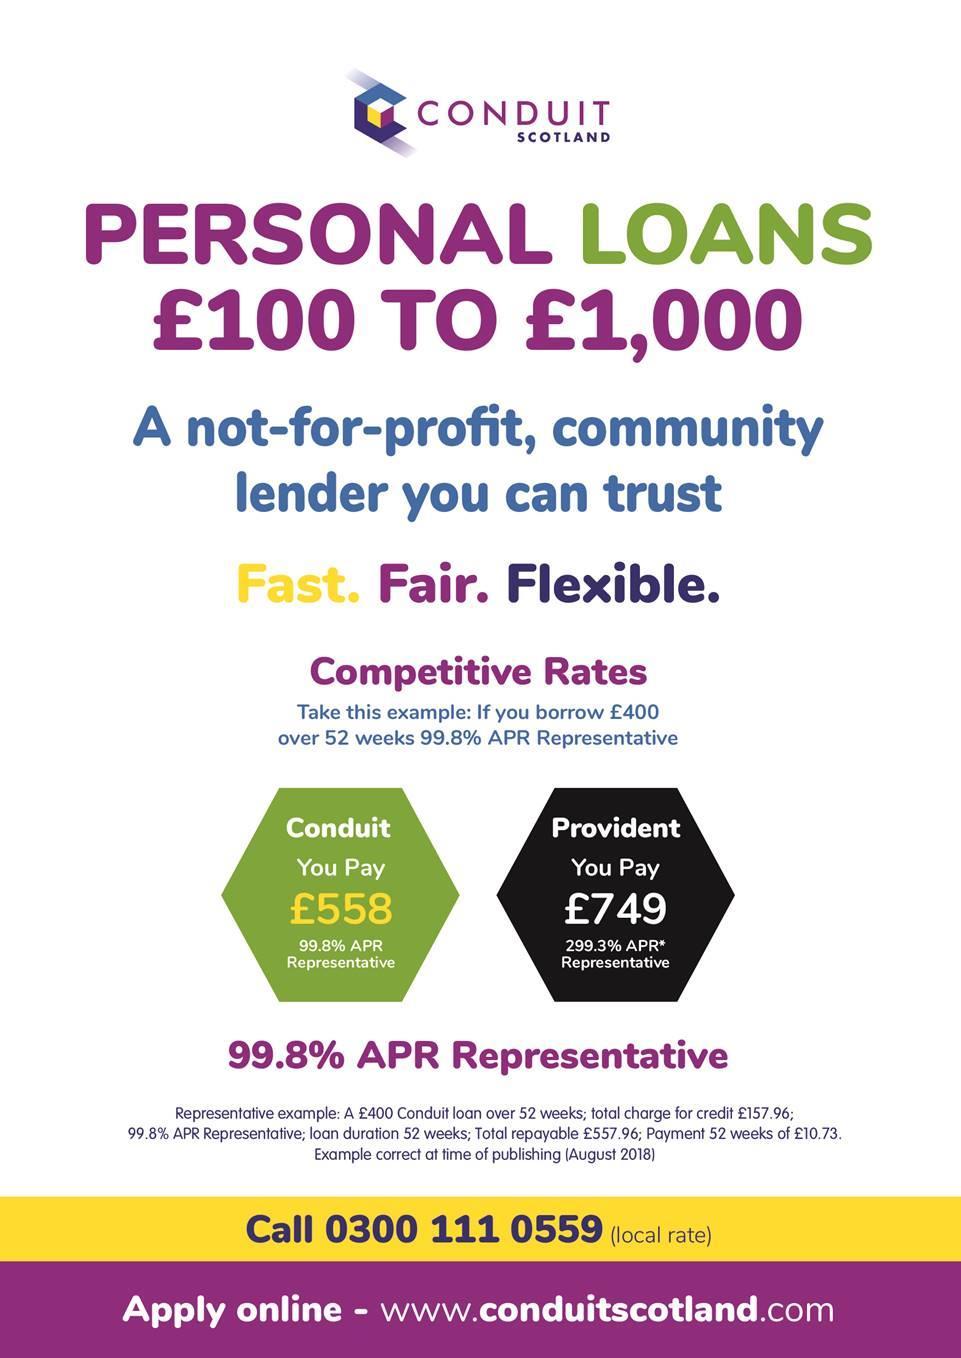 What is APR? APR (annual percentage rate) is a useful comparator for large multiyear loans like a mortgage. But it has limitations in differentiating the value of smaller sum loans.